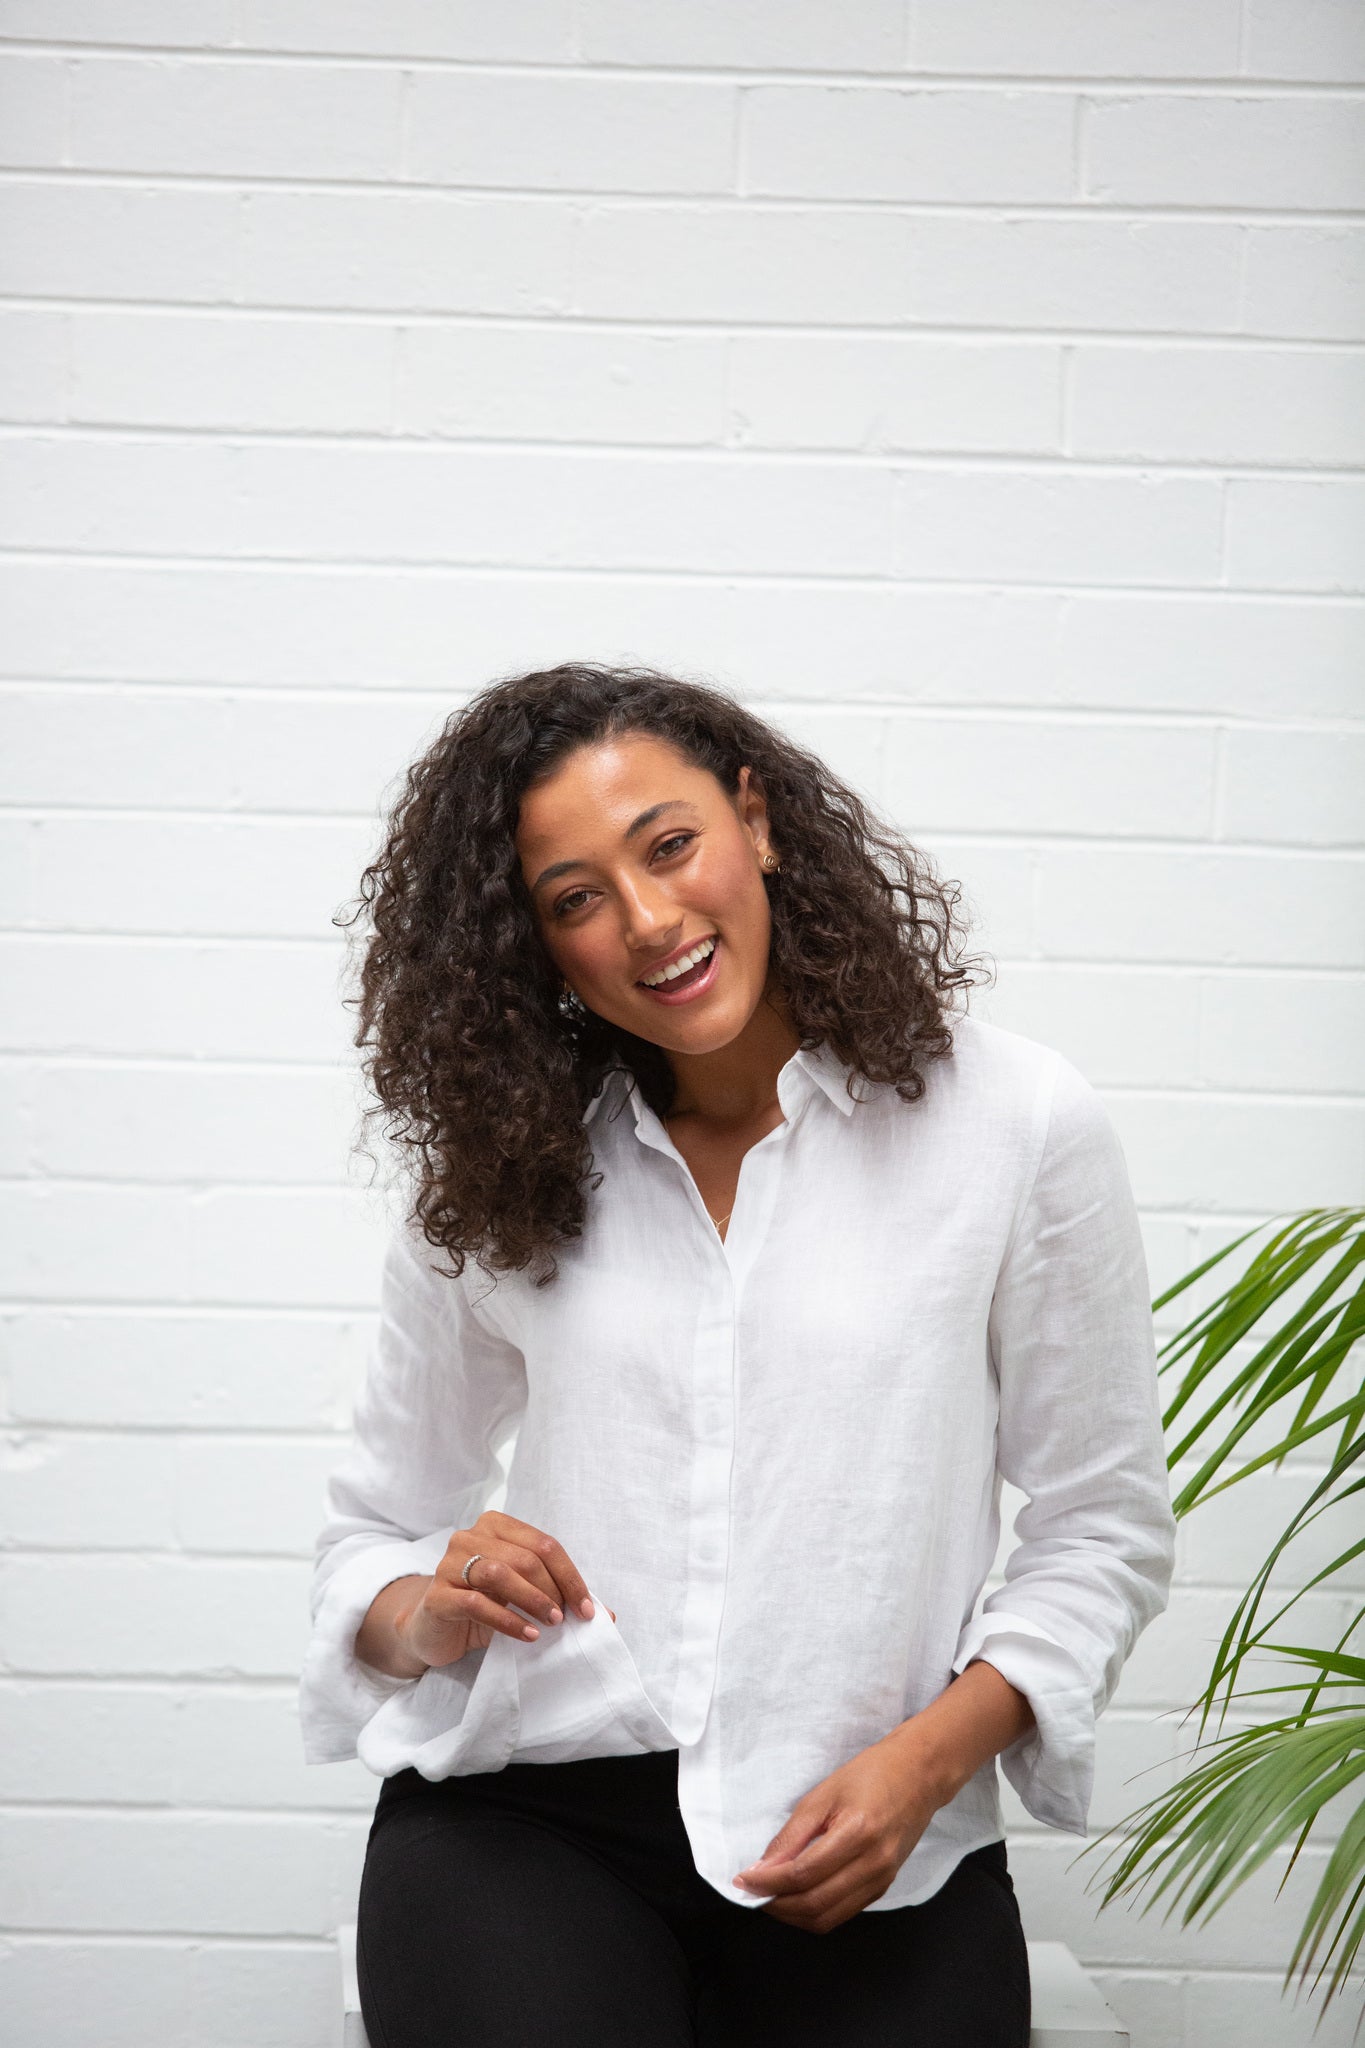 A model wearing a white linen shirt and black pants